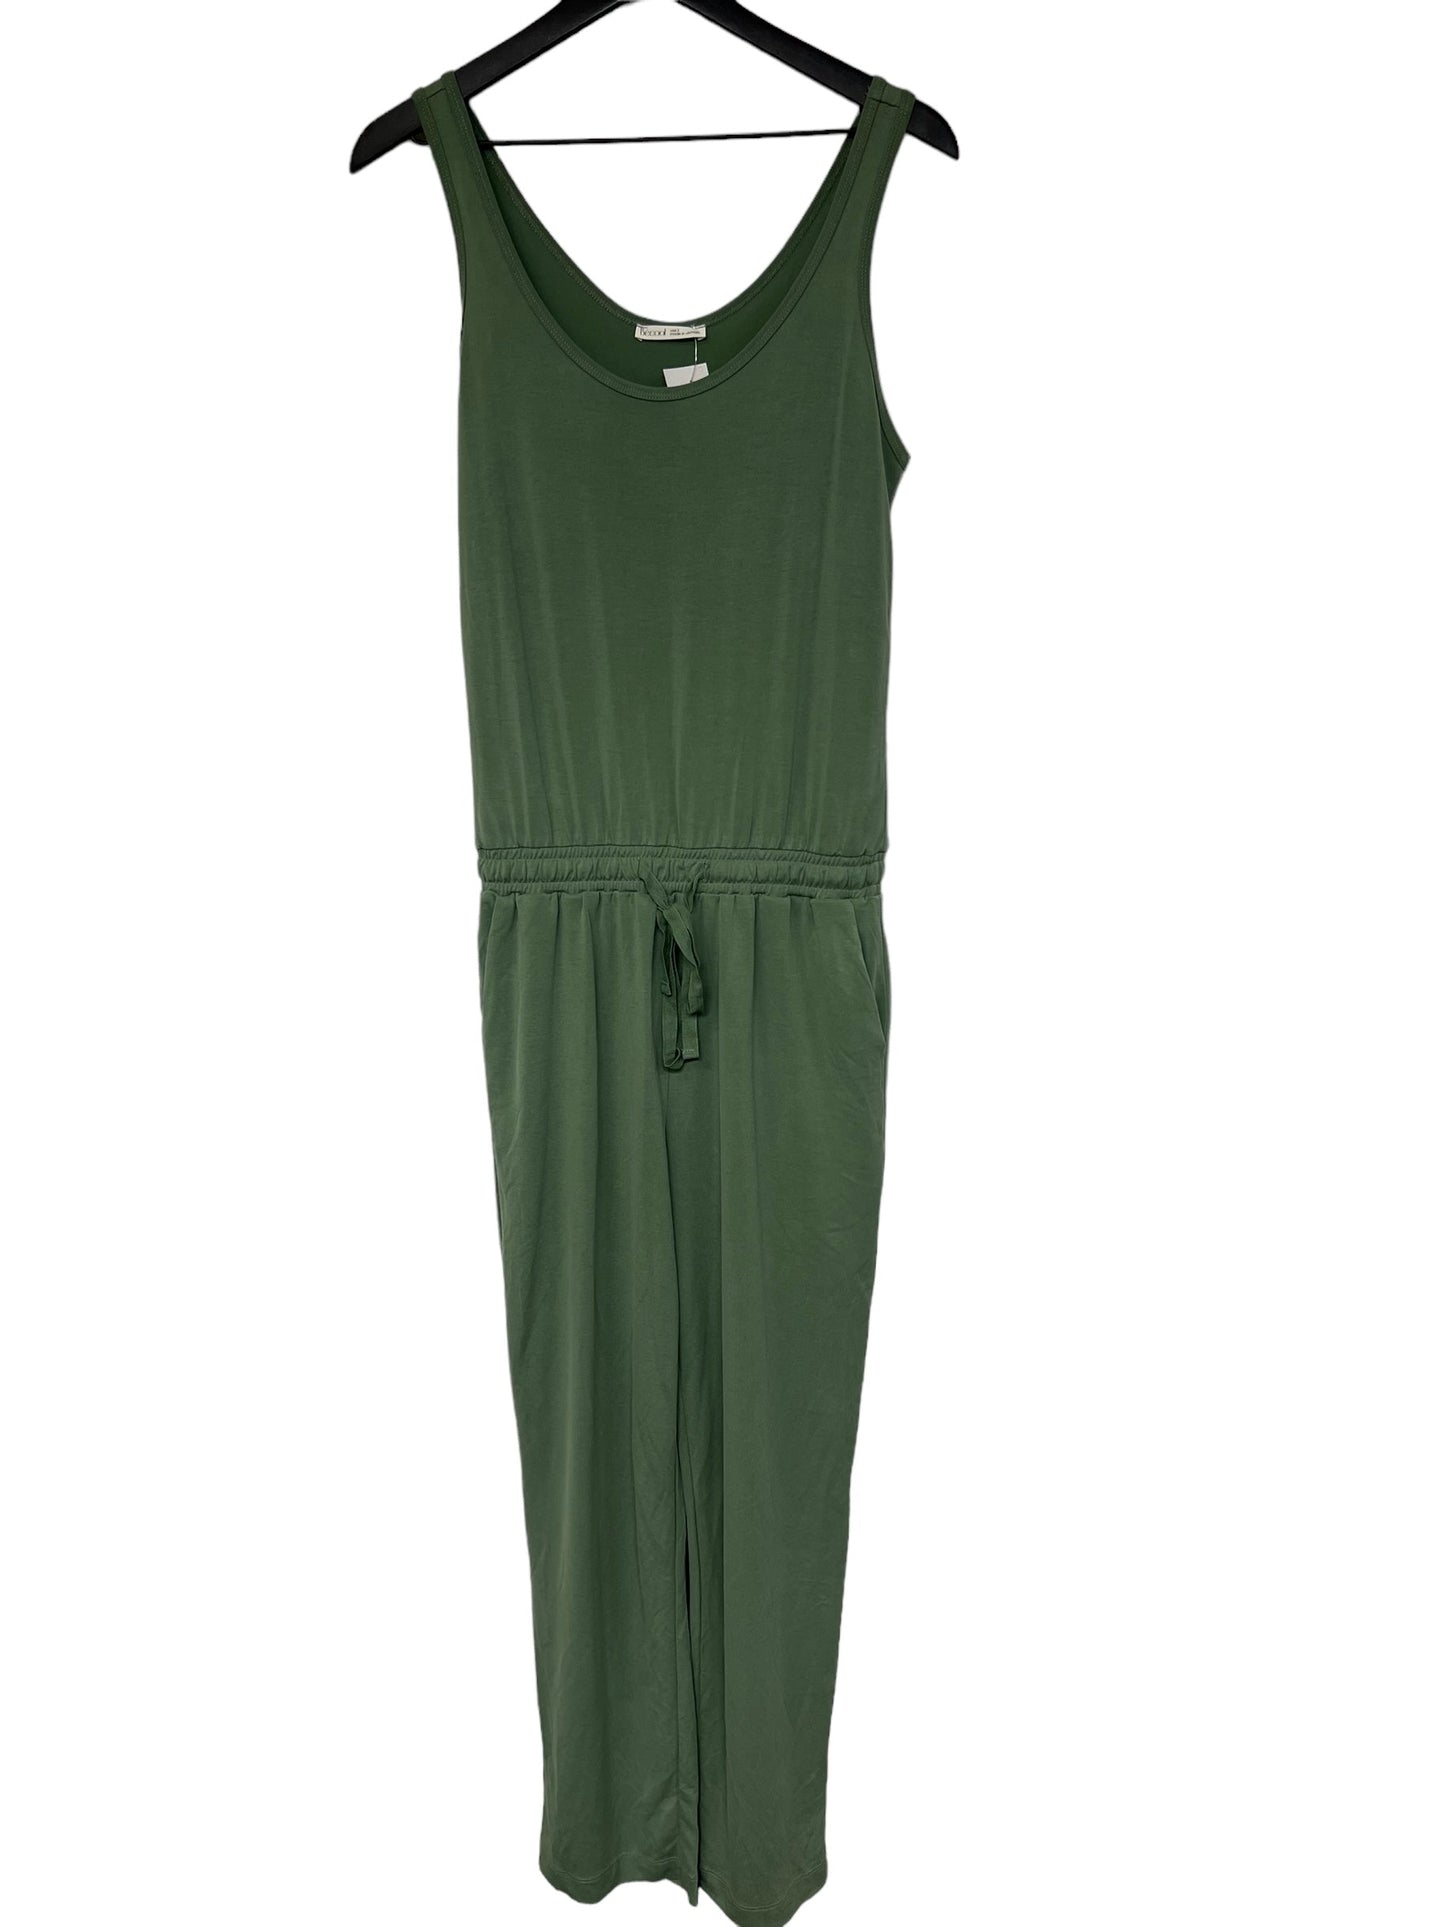 Green Jumpsuit Clothes Mentor, Size S